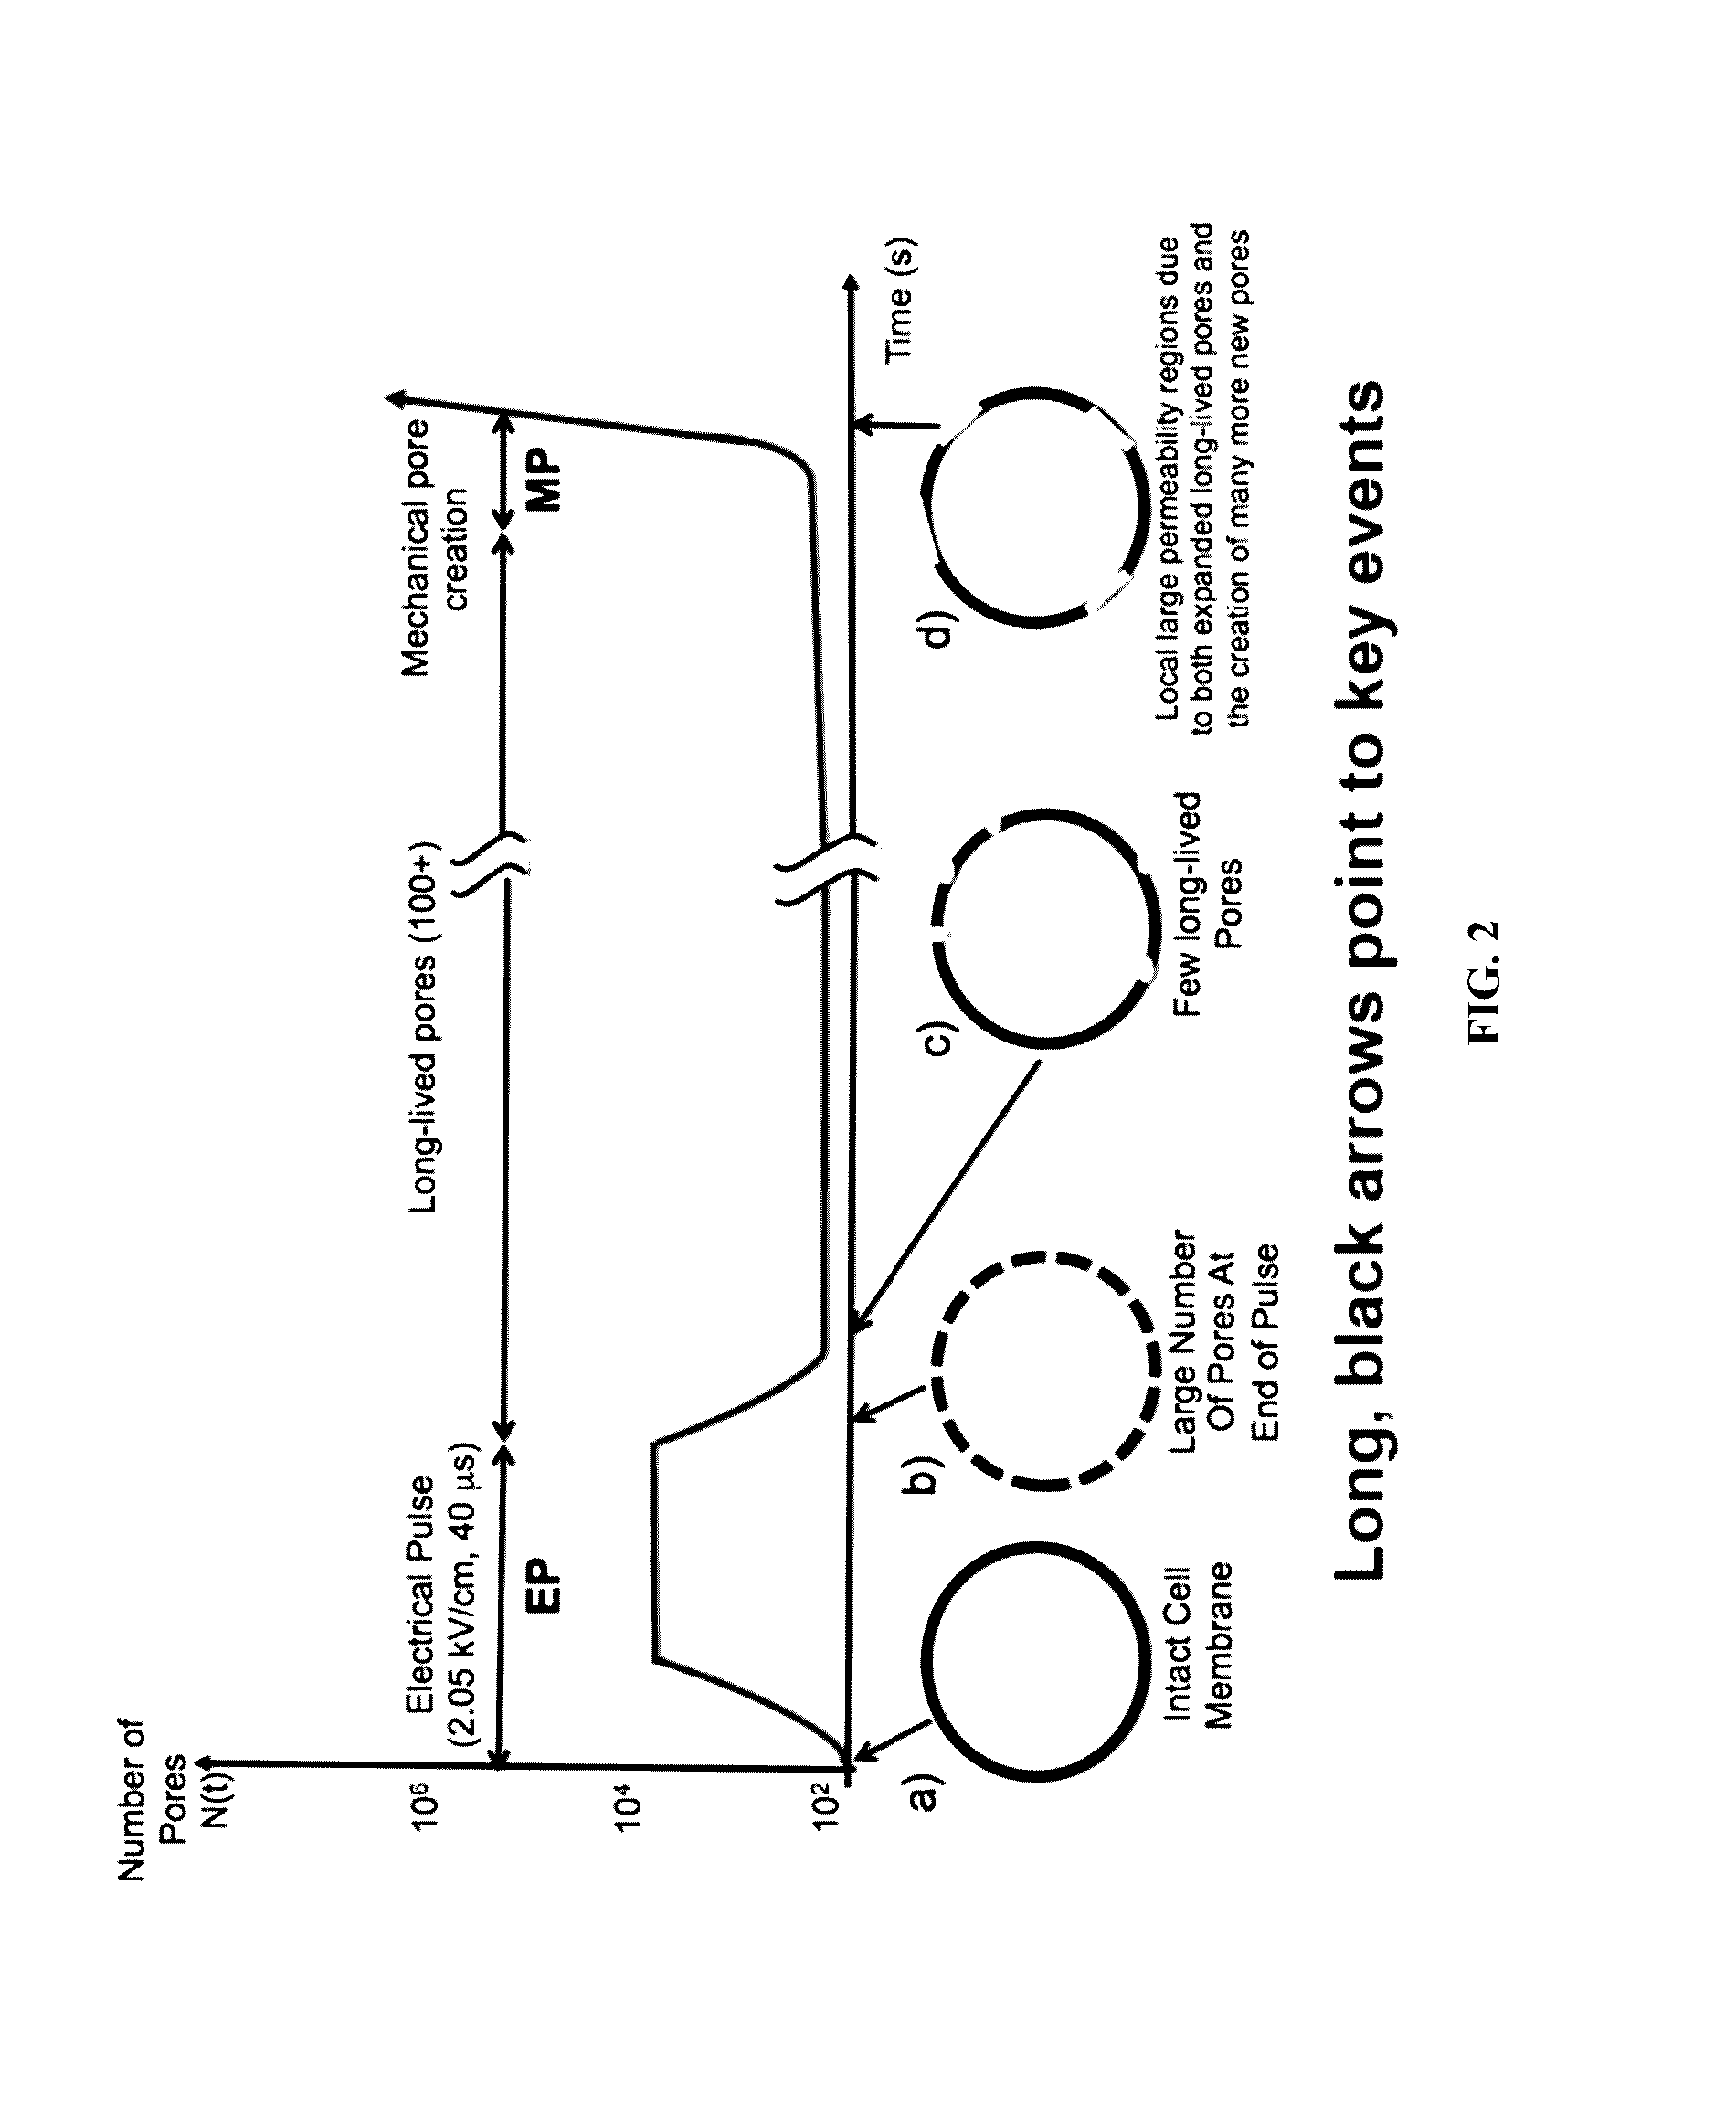 Methods for inducing electroporation and tissue ablation